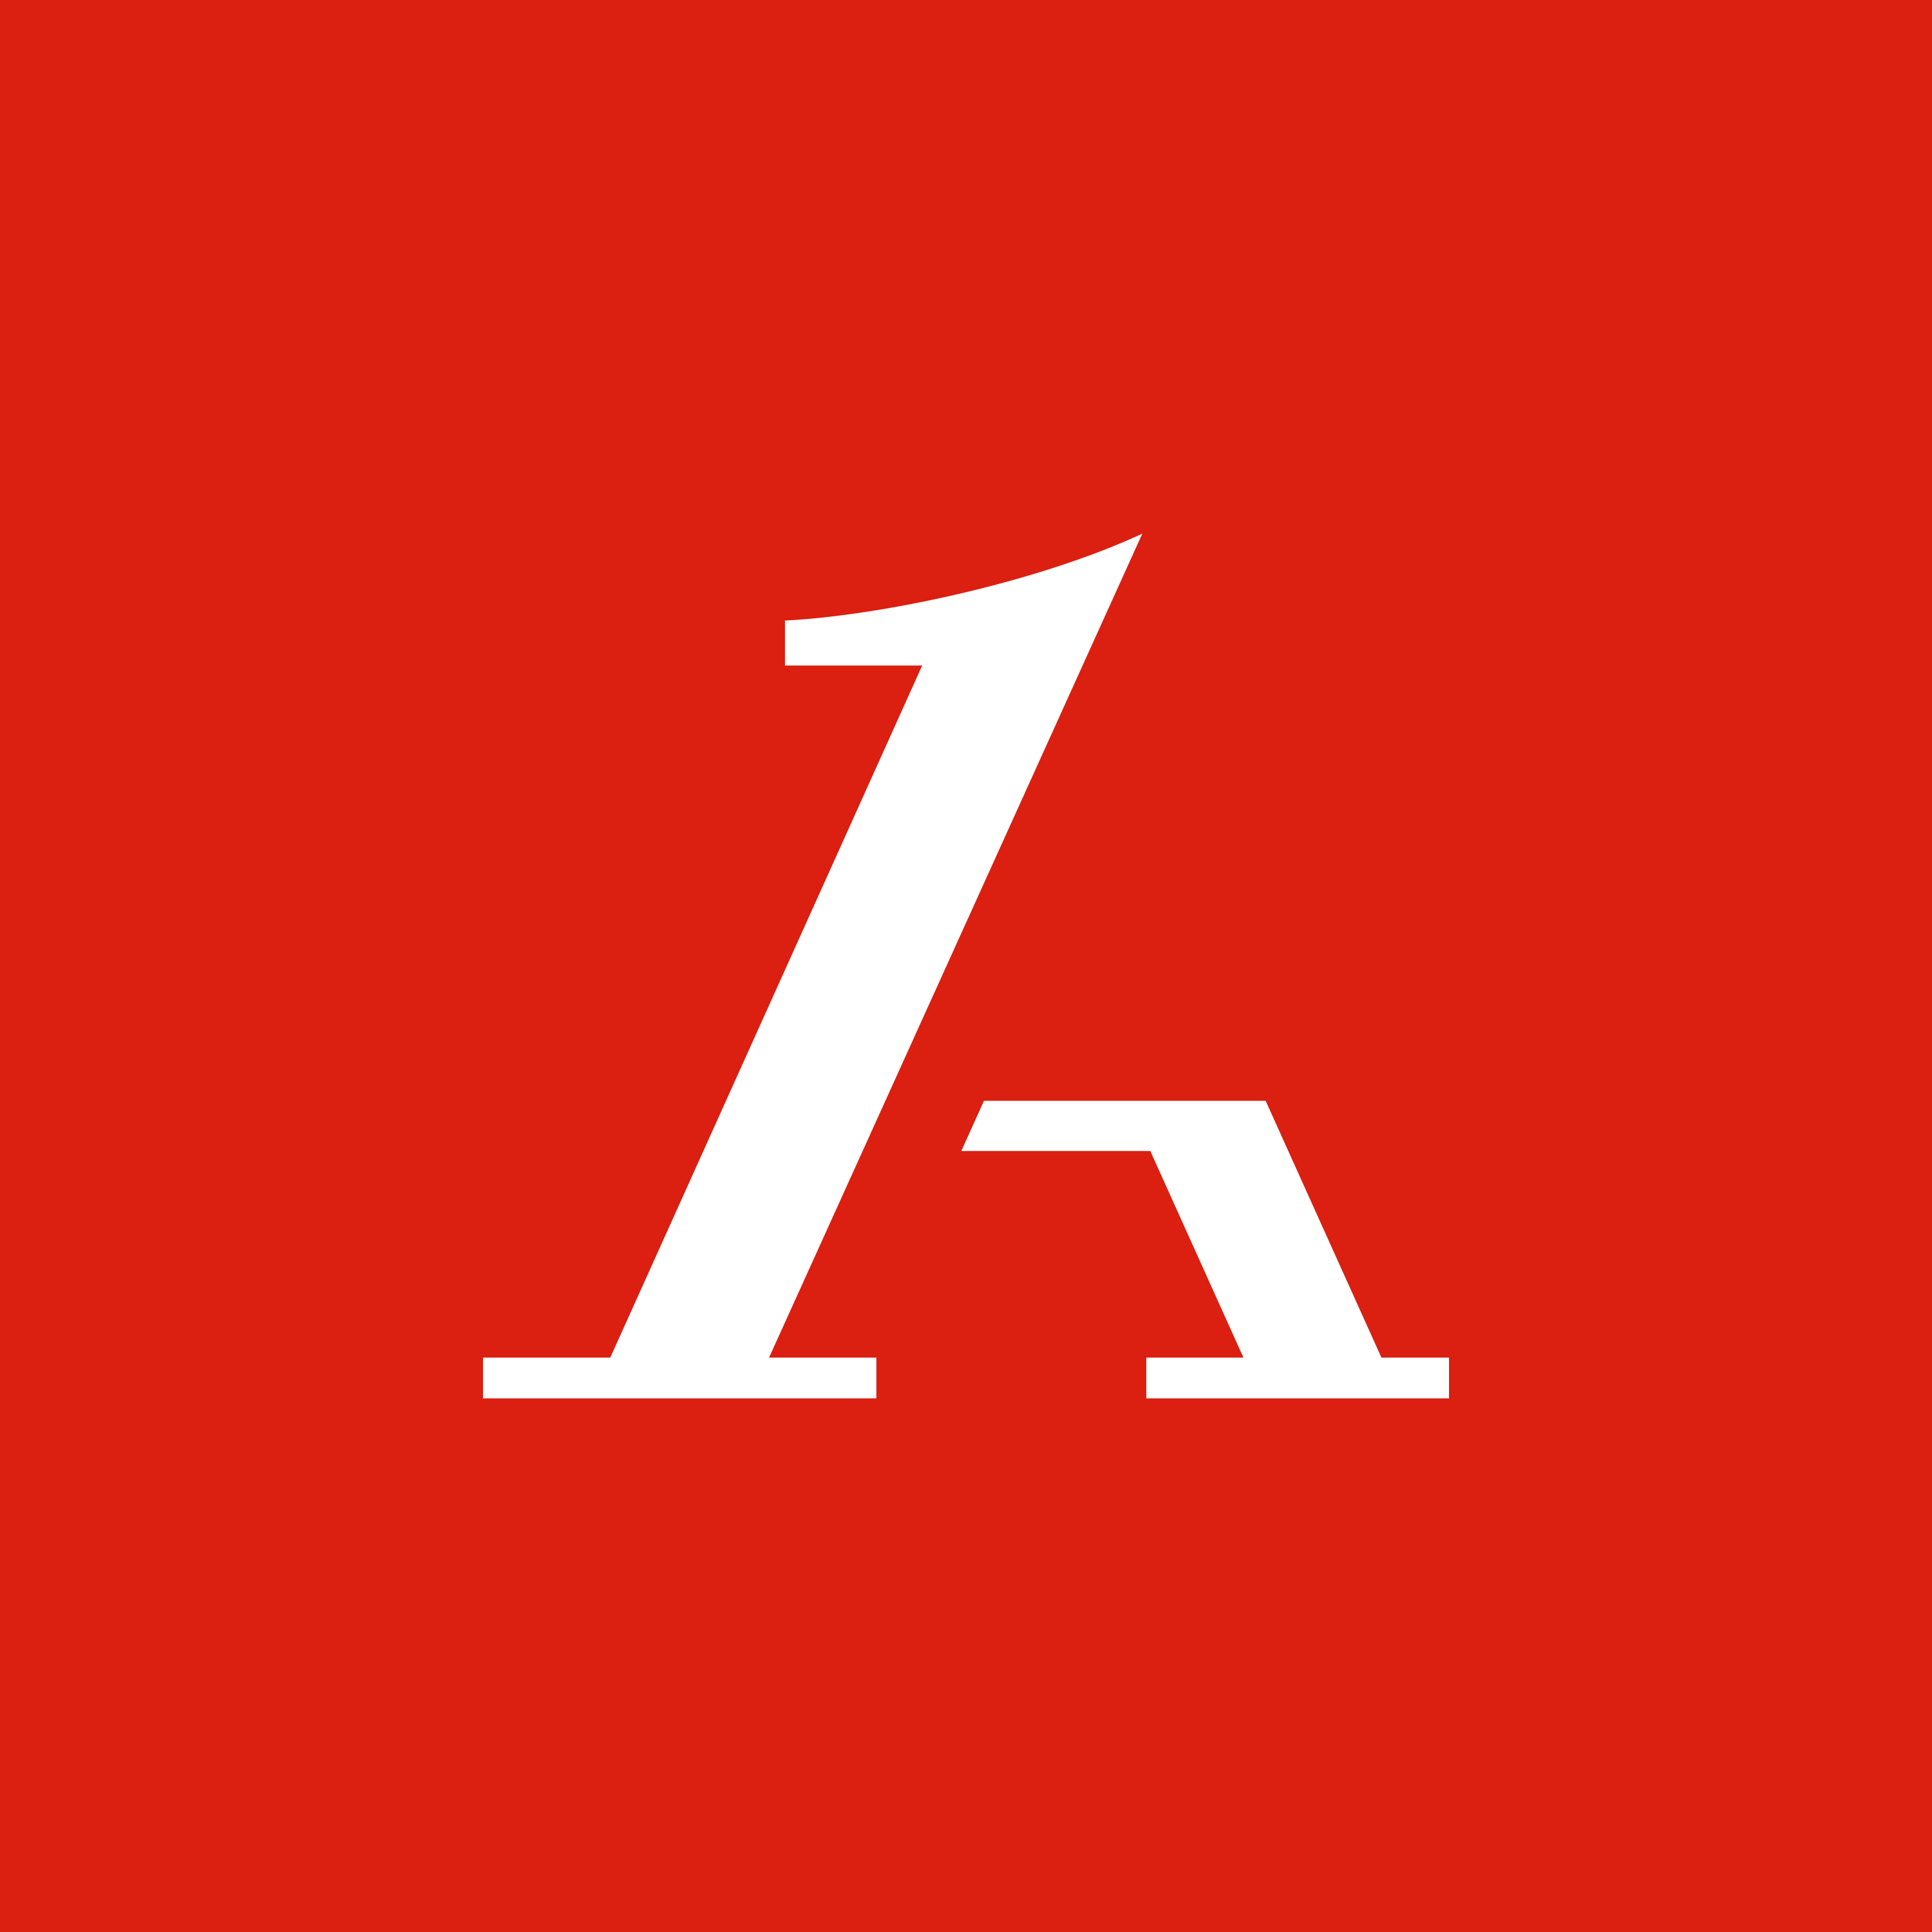 A red square with an image of the letter a.